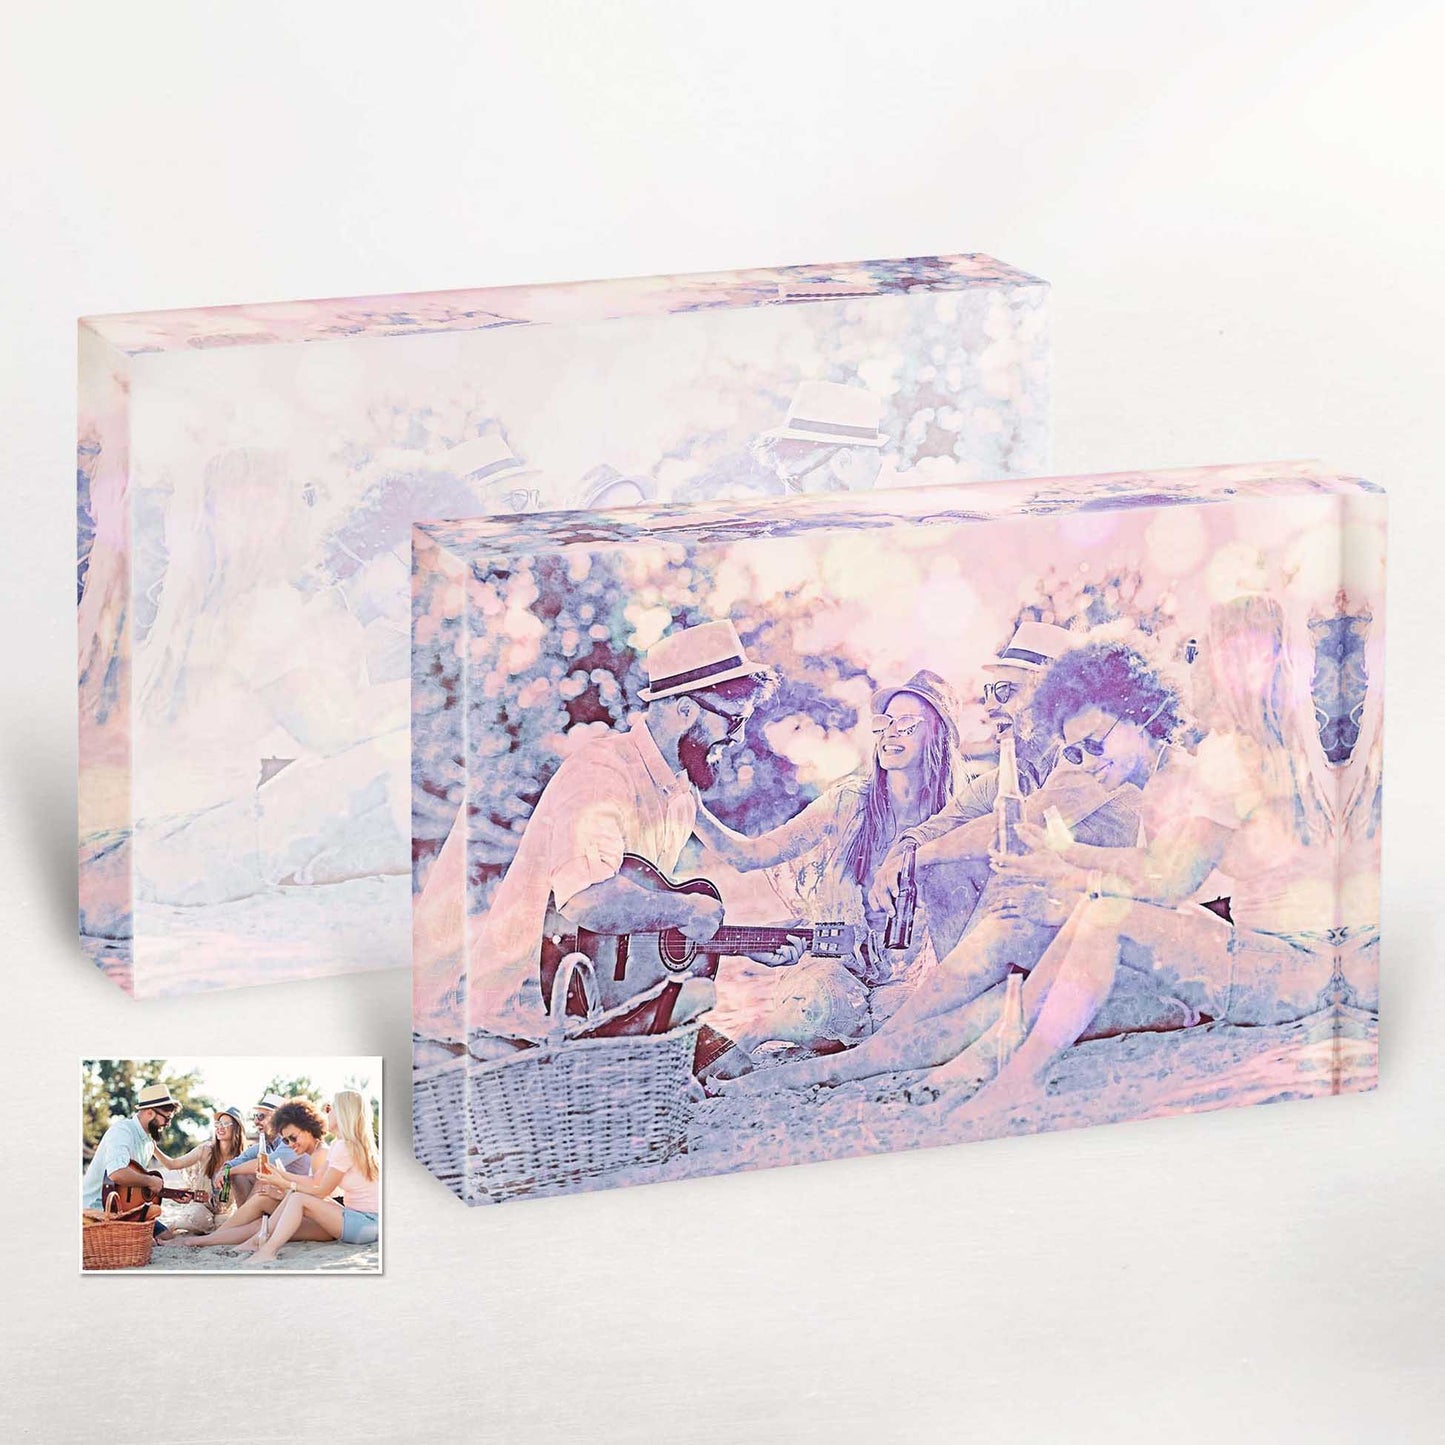 Elevate your photos with a Personalised Special FX Acrylic Block, featuring a film effect that adds a cool and fresh touch. This novelty and unique piece is made to order, making it the perfect anniversary or birthday gift